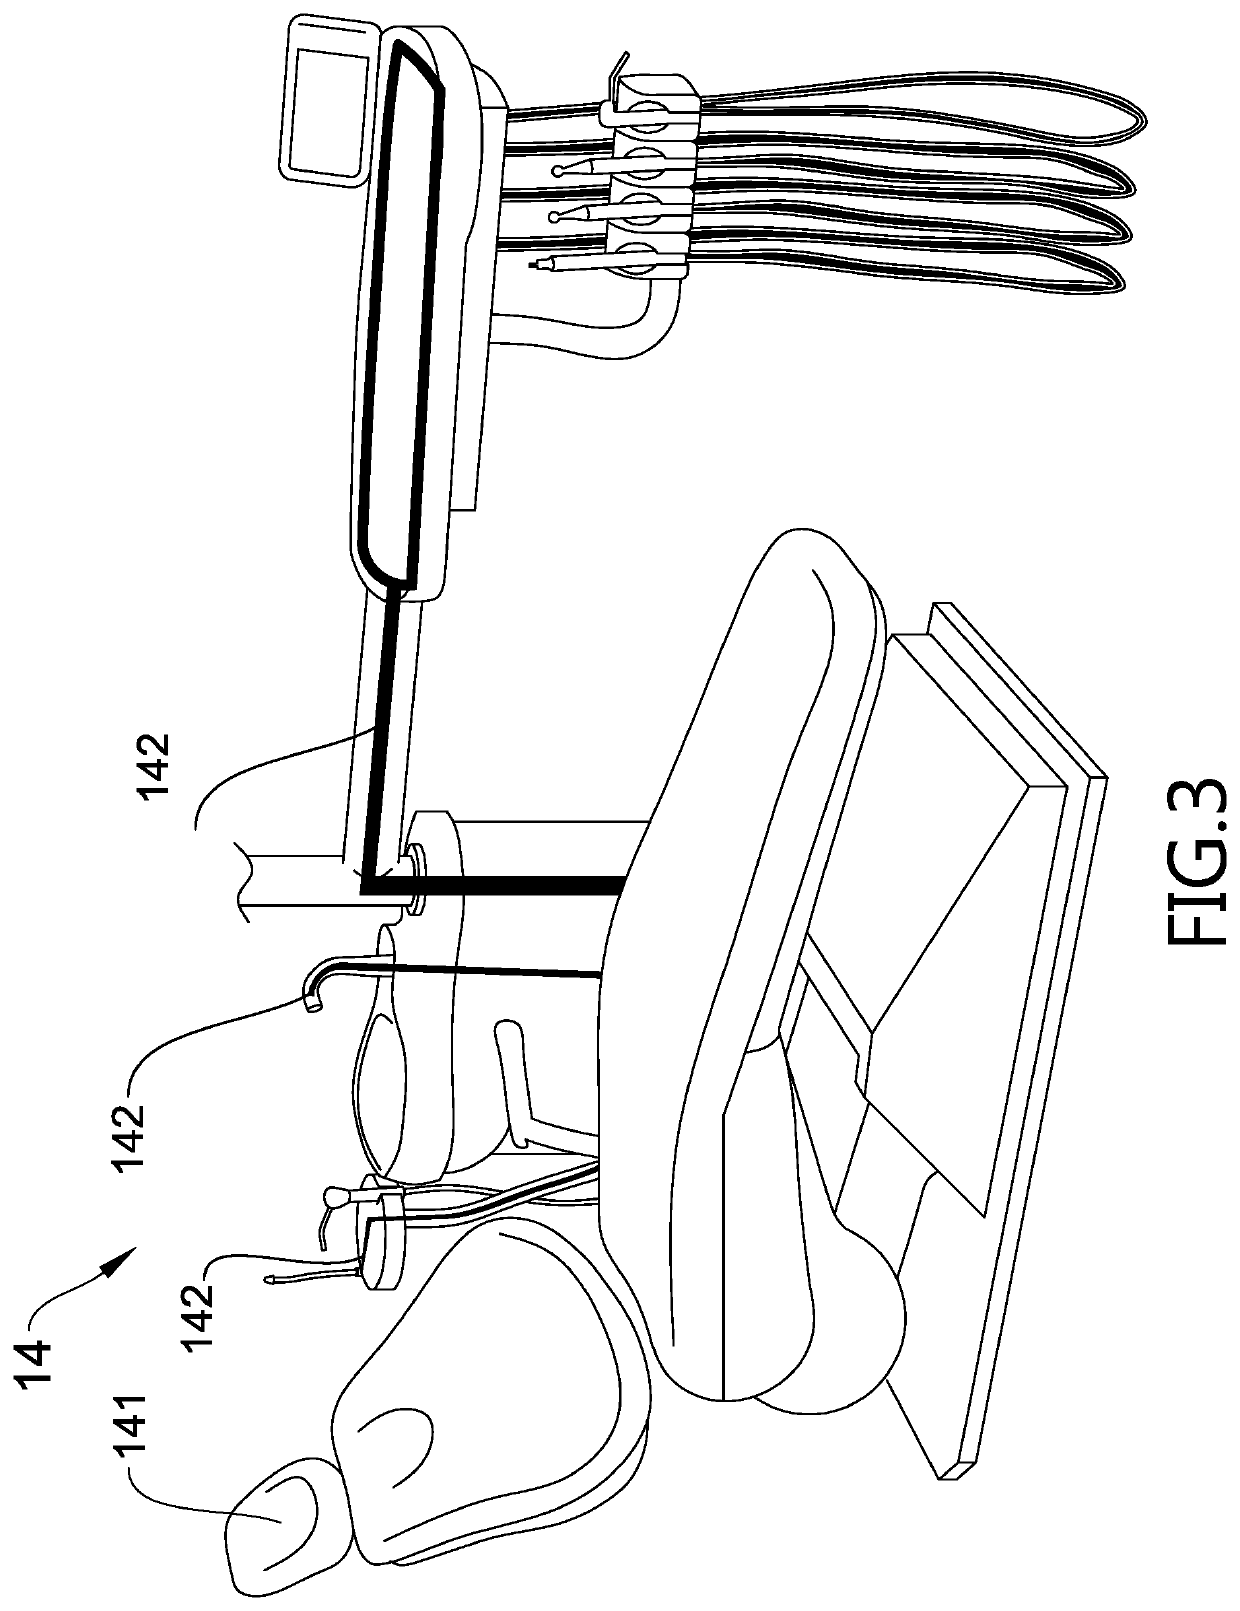 Water purification apparatus for dental treatment